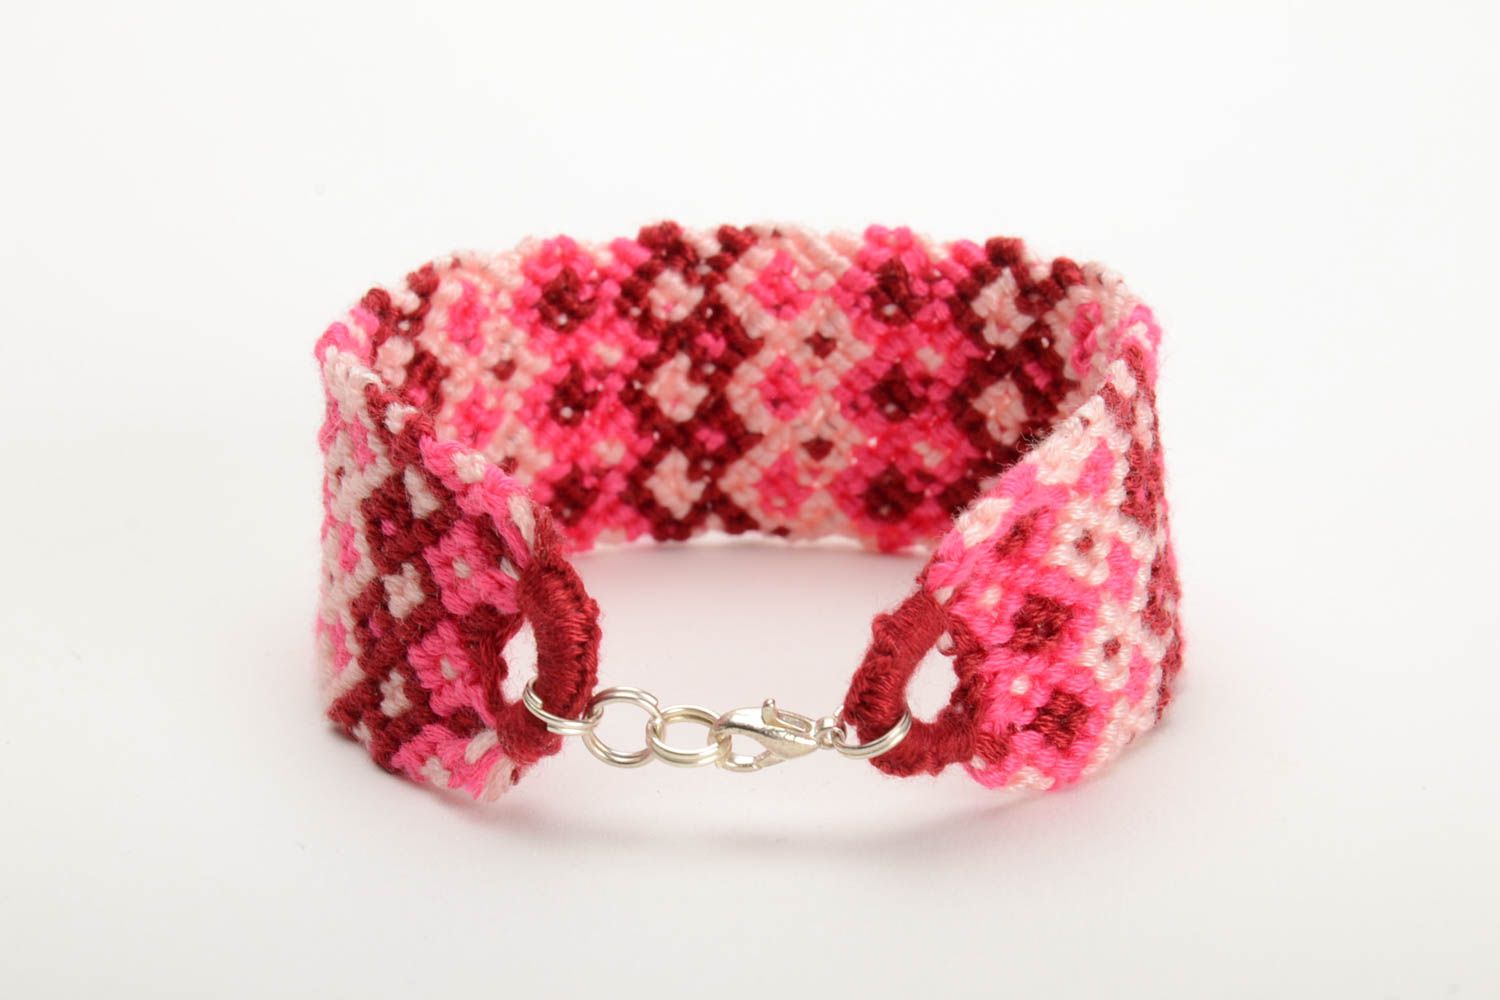 Beautiful dark red and pink handmade wide bracelet woven of embroidery floss photo 3